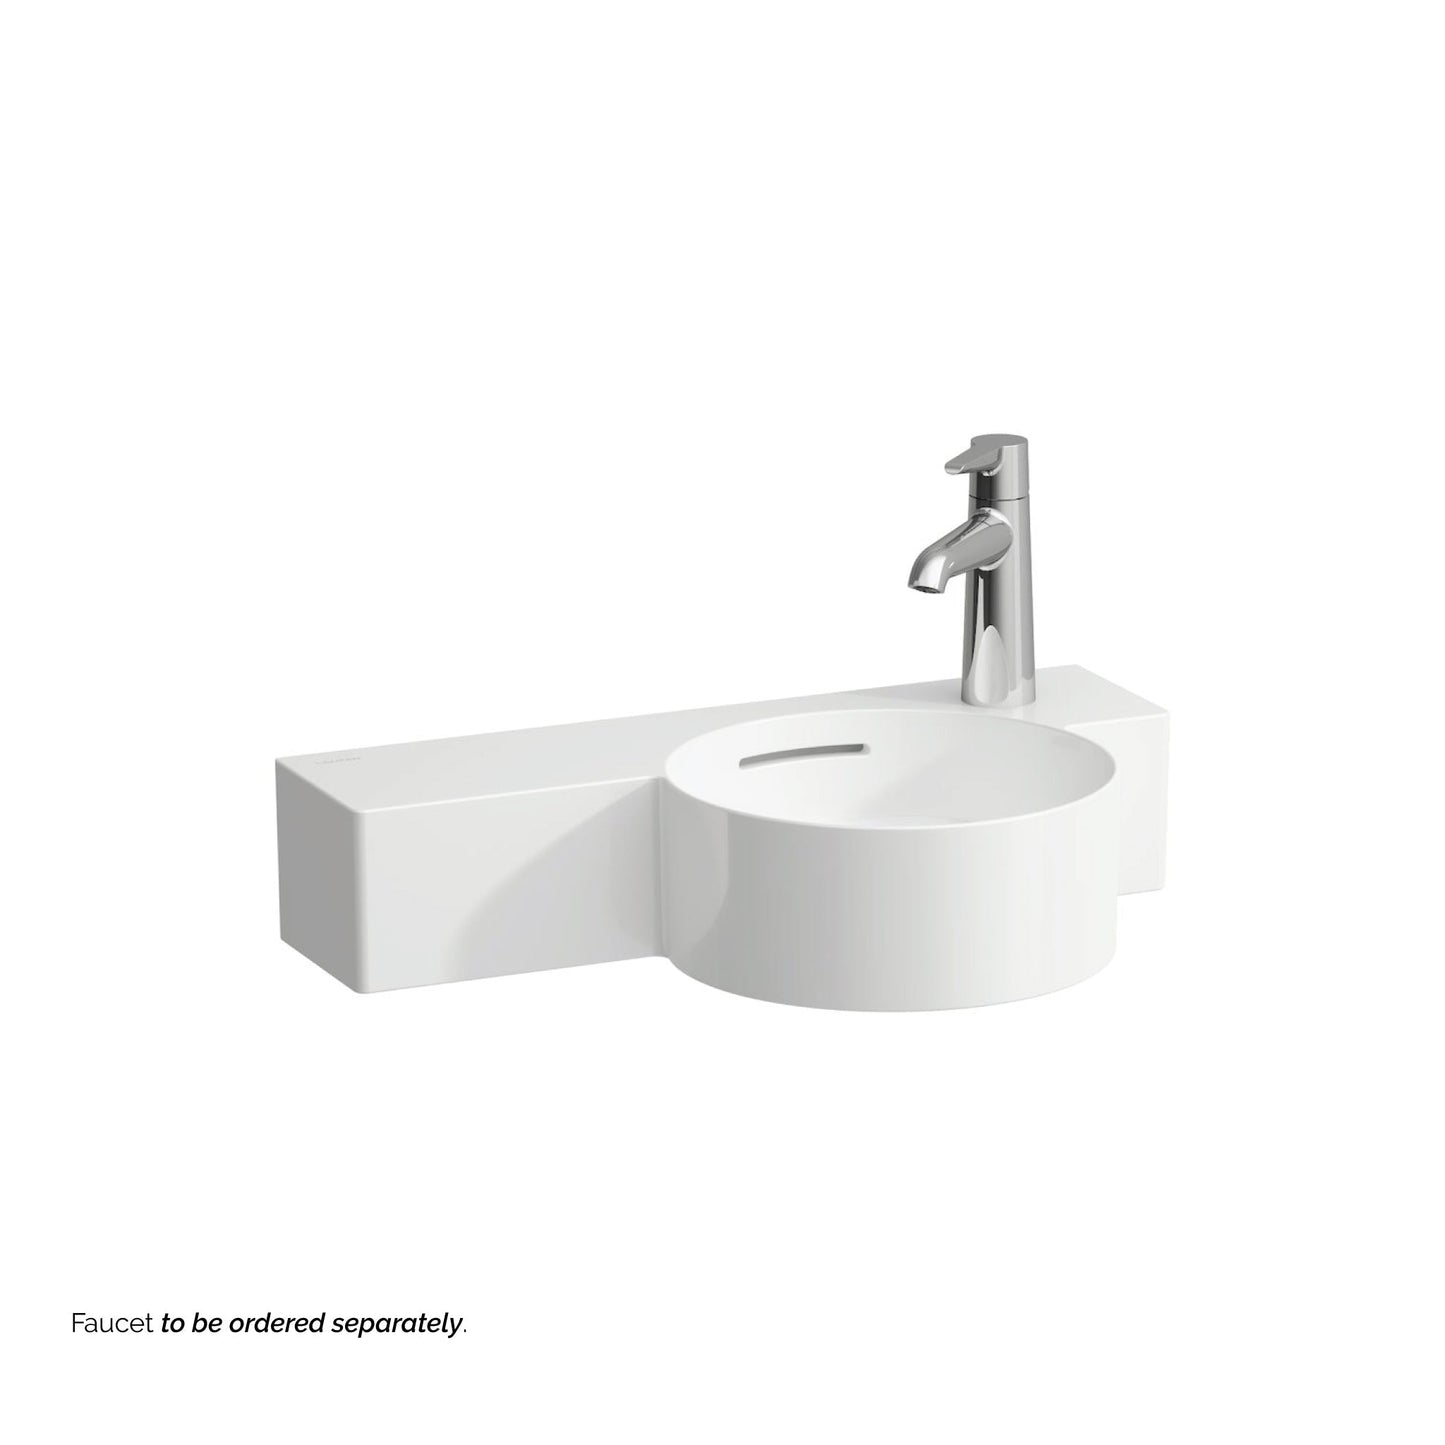 Laufen Val 22" x 12" White Wall-Mounted Shelf-Left Bathroom Sink With Faucet Hole on the Right